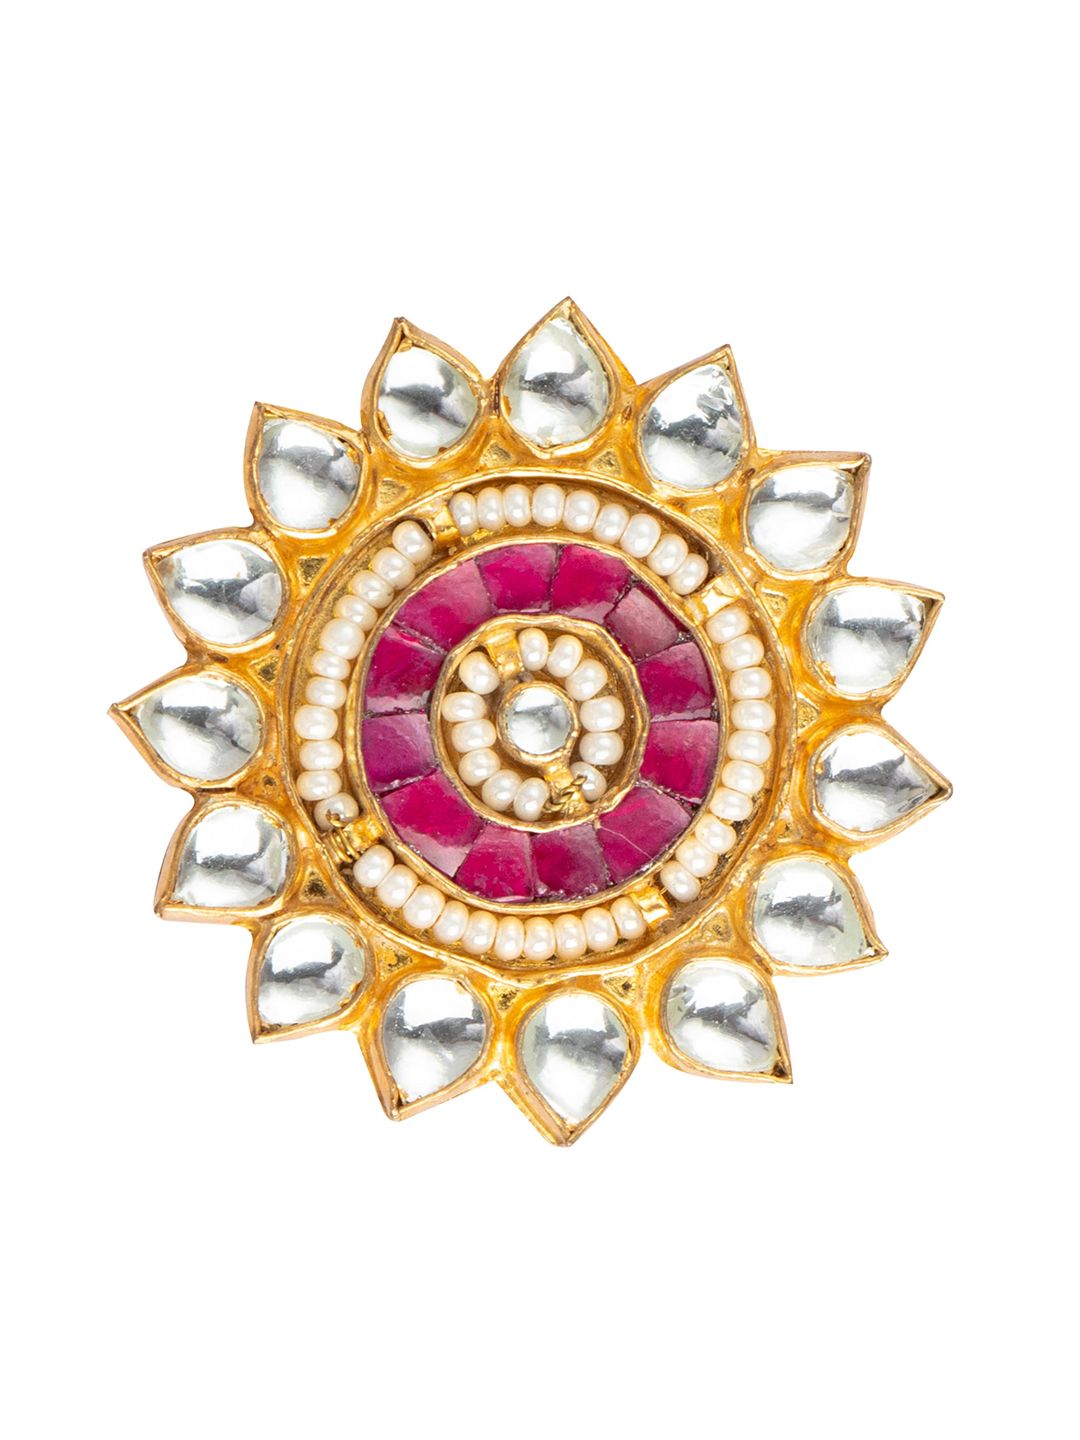 MORKANTH JEWELLERY Gold-Plated Pink Kundan-Studded Handcrafted Finger Ring Price in India